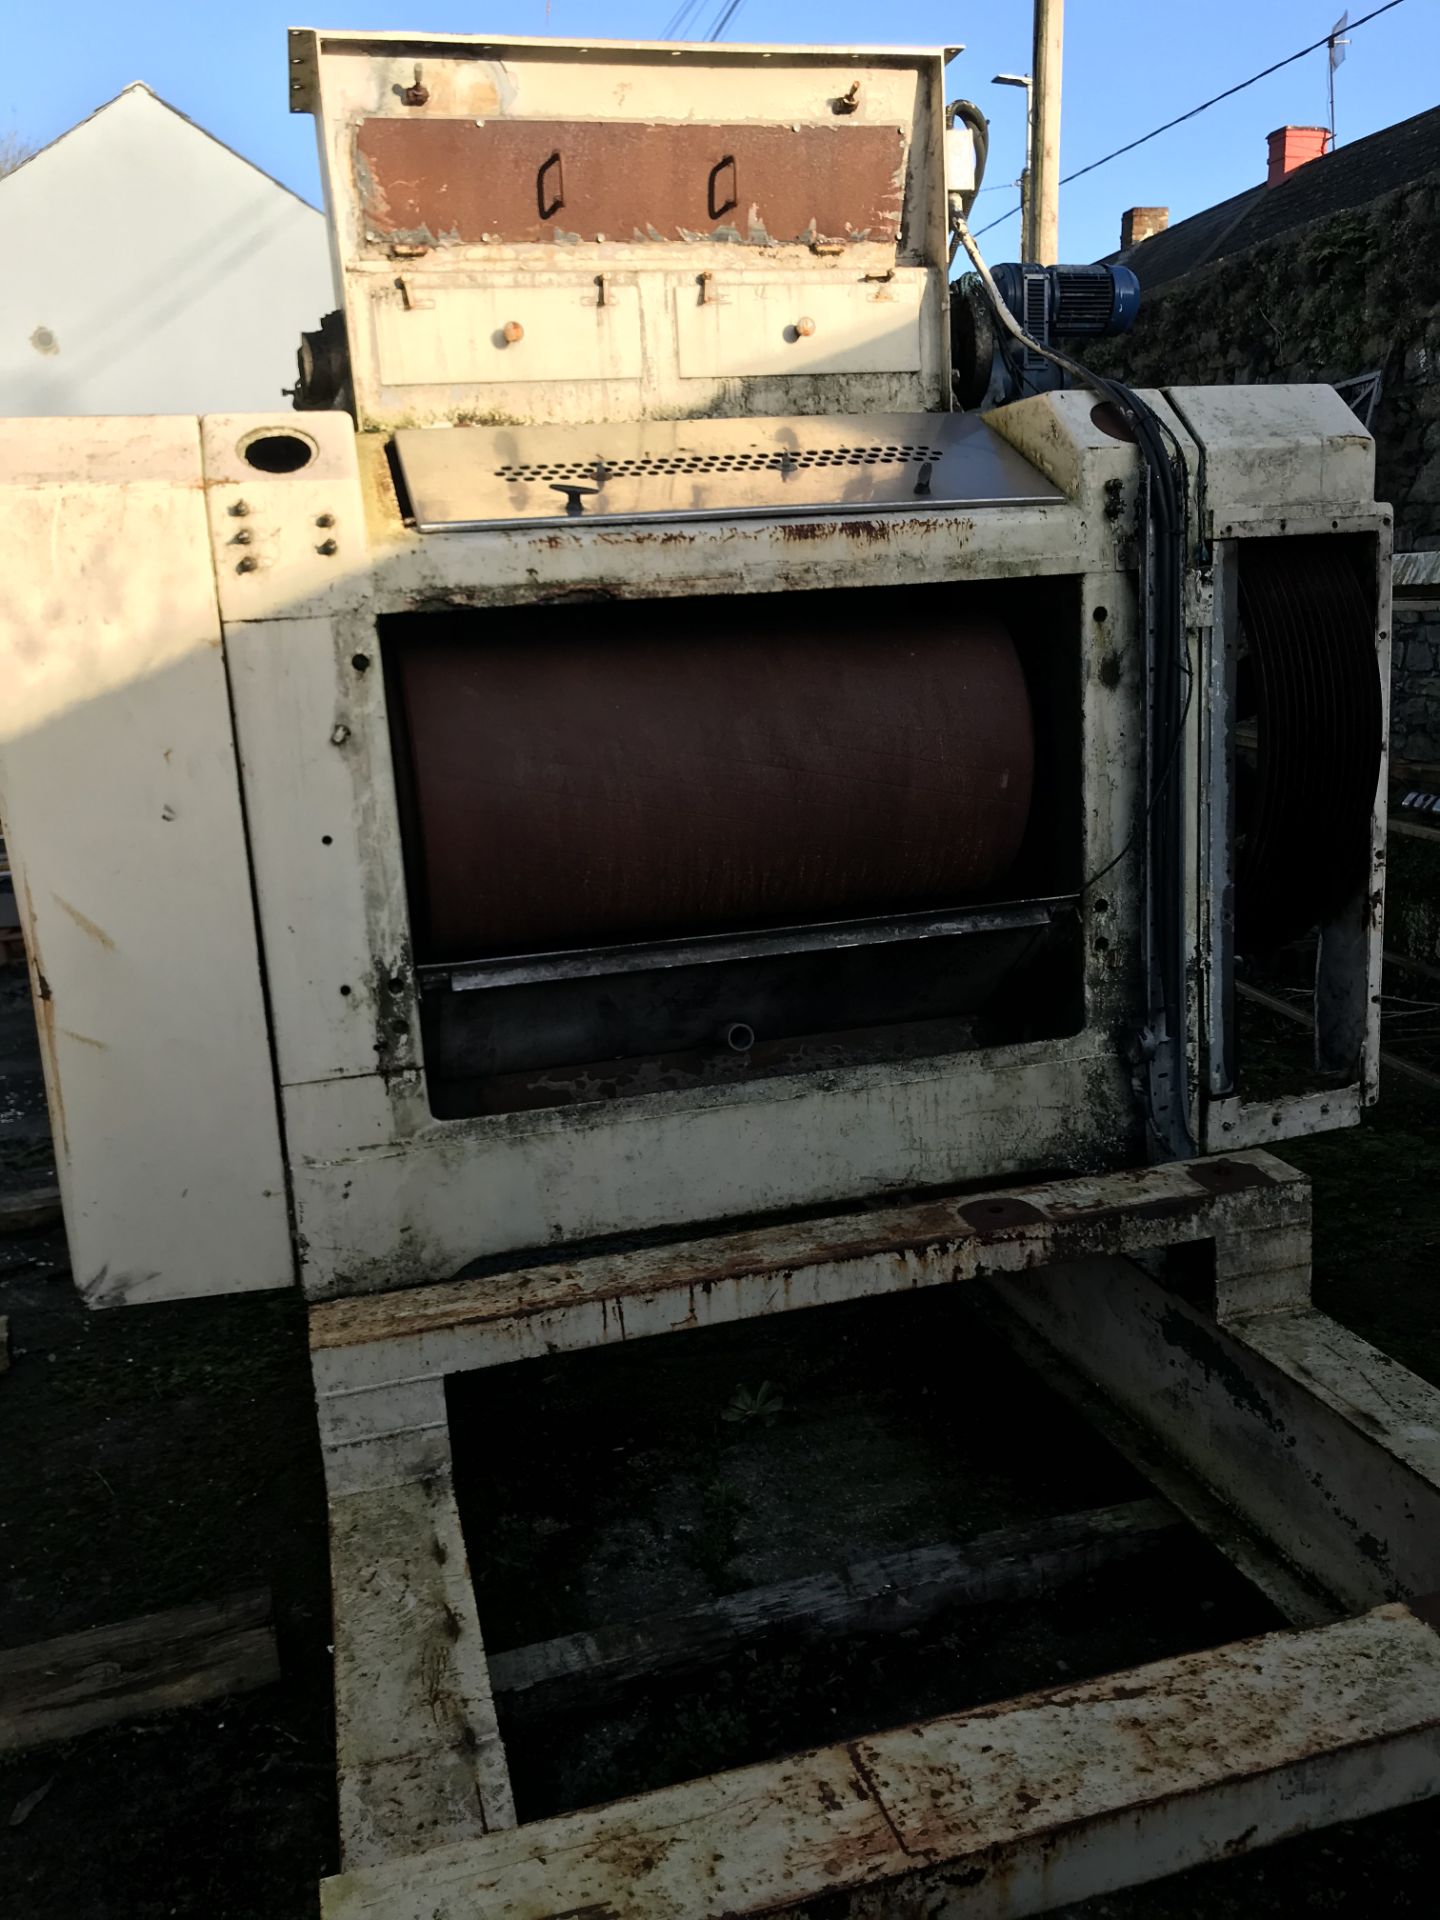 Buhler Roller Flaking Mill, serial no. 76399, with